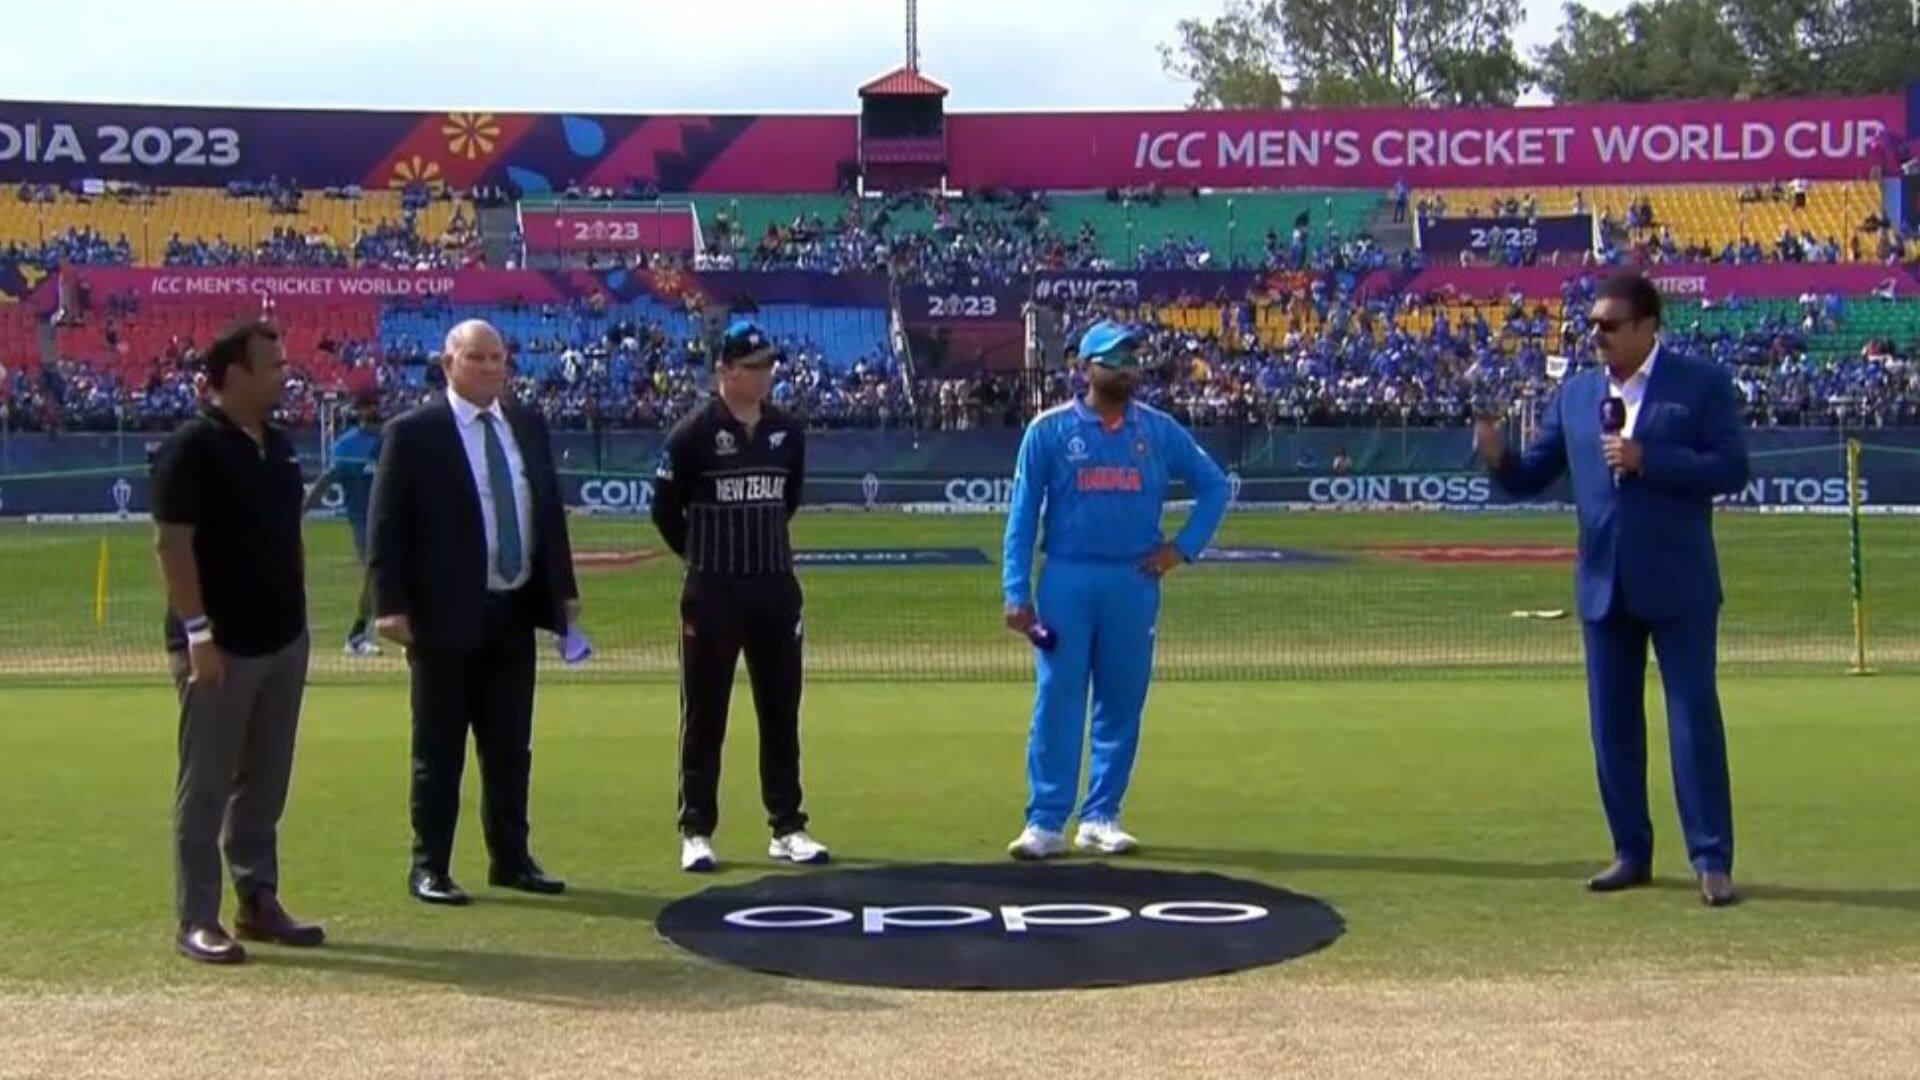 LIVE BLOG - IND vs NZ, ICC World Cup 2023: Toss, Score, Videos And Updates From Dharamsala